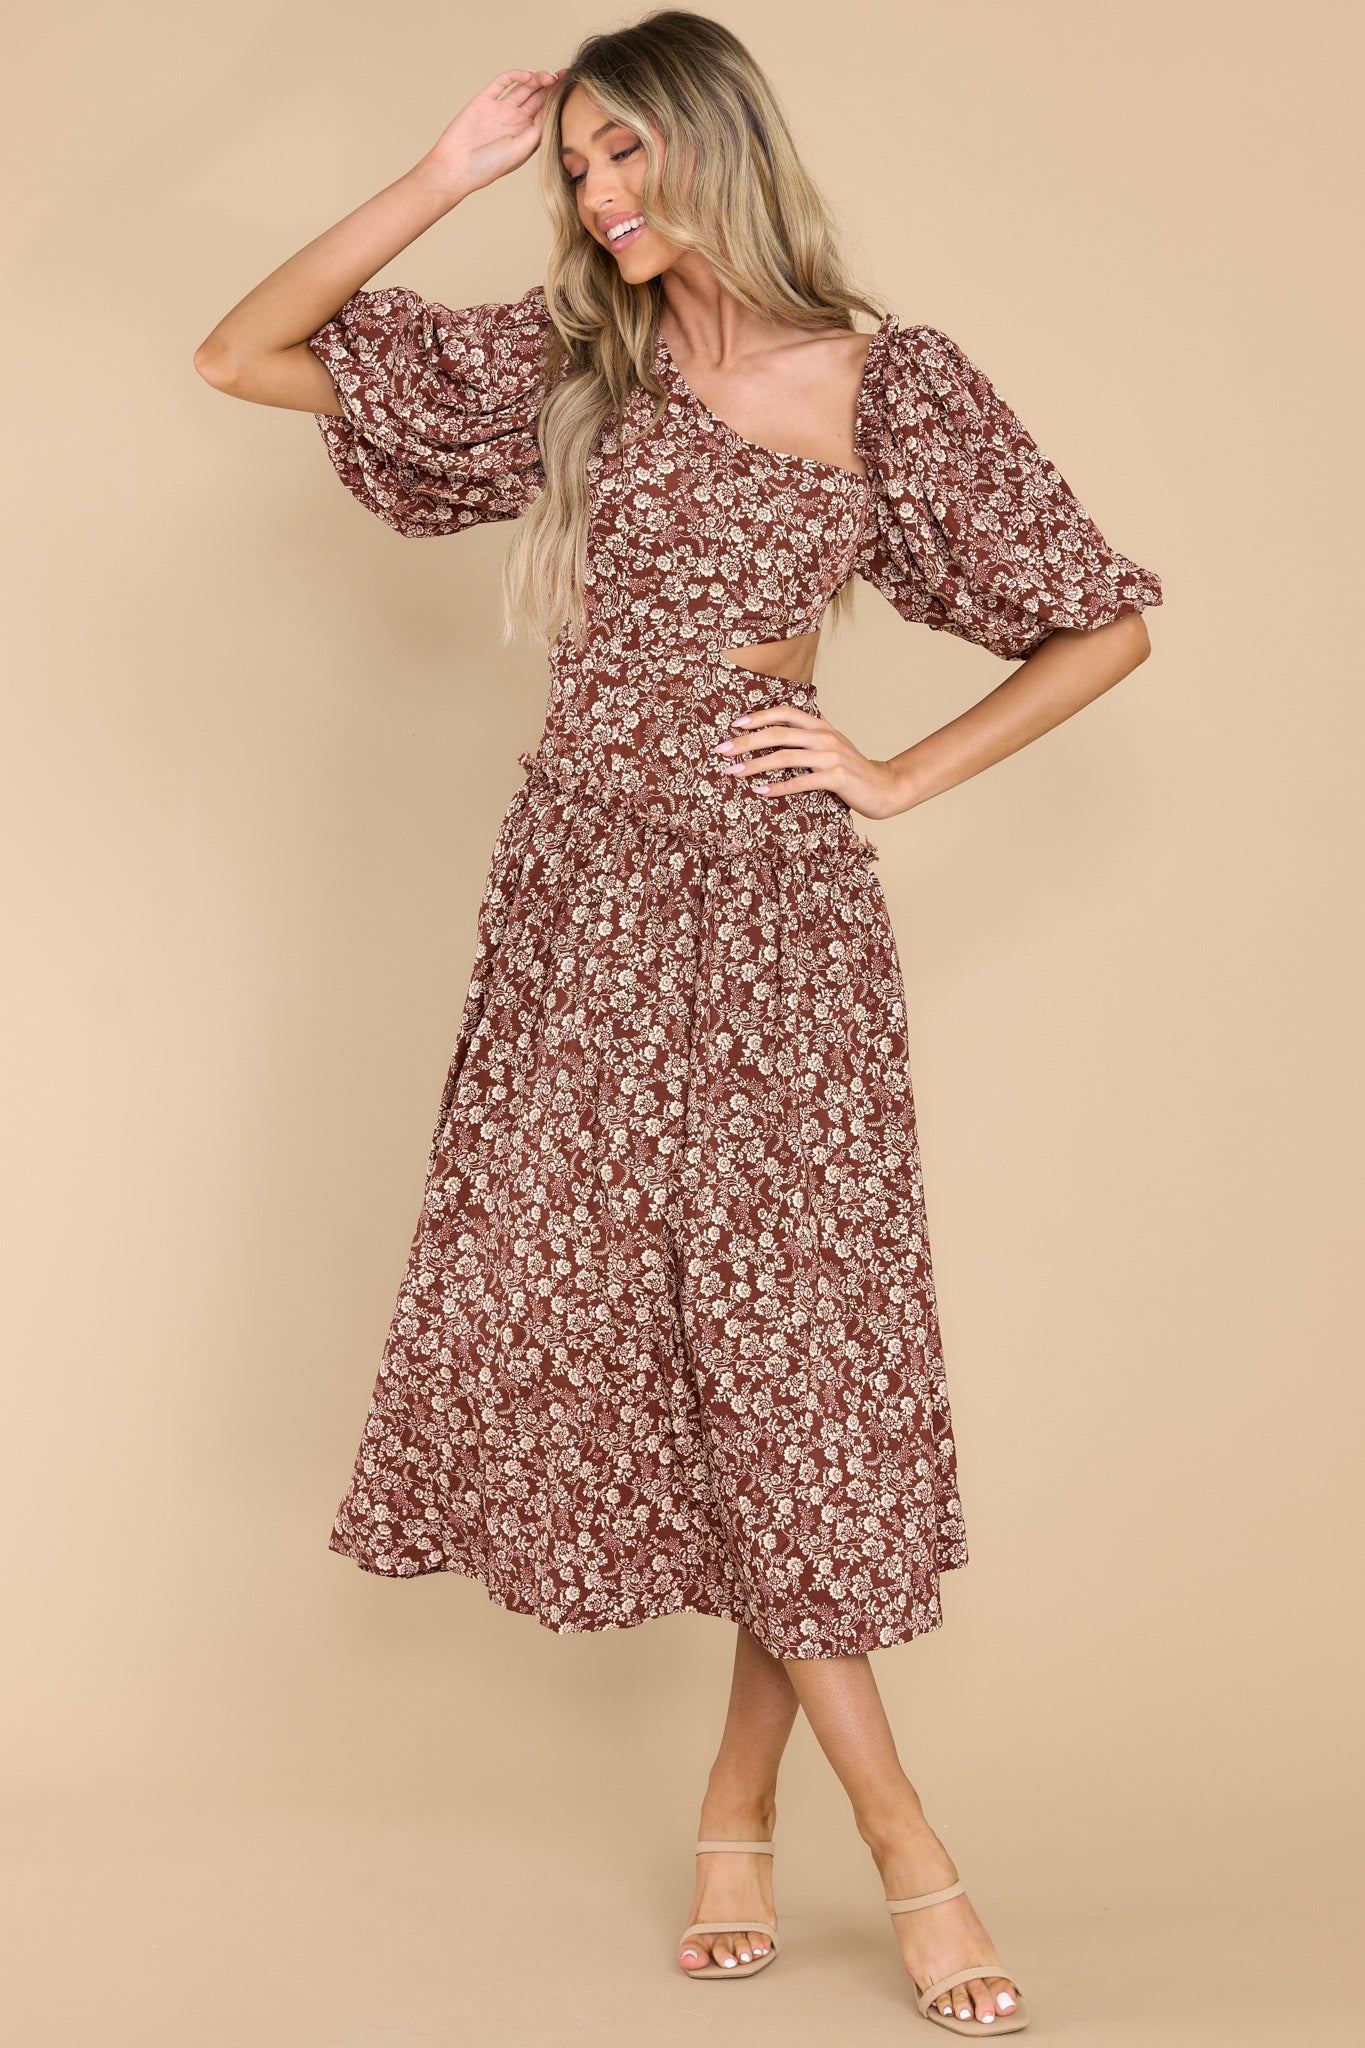 Know By Heart Brown Floral Print Midi Dress - Red Dress